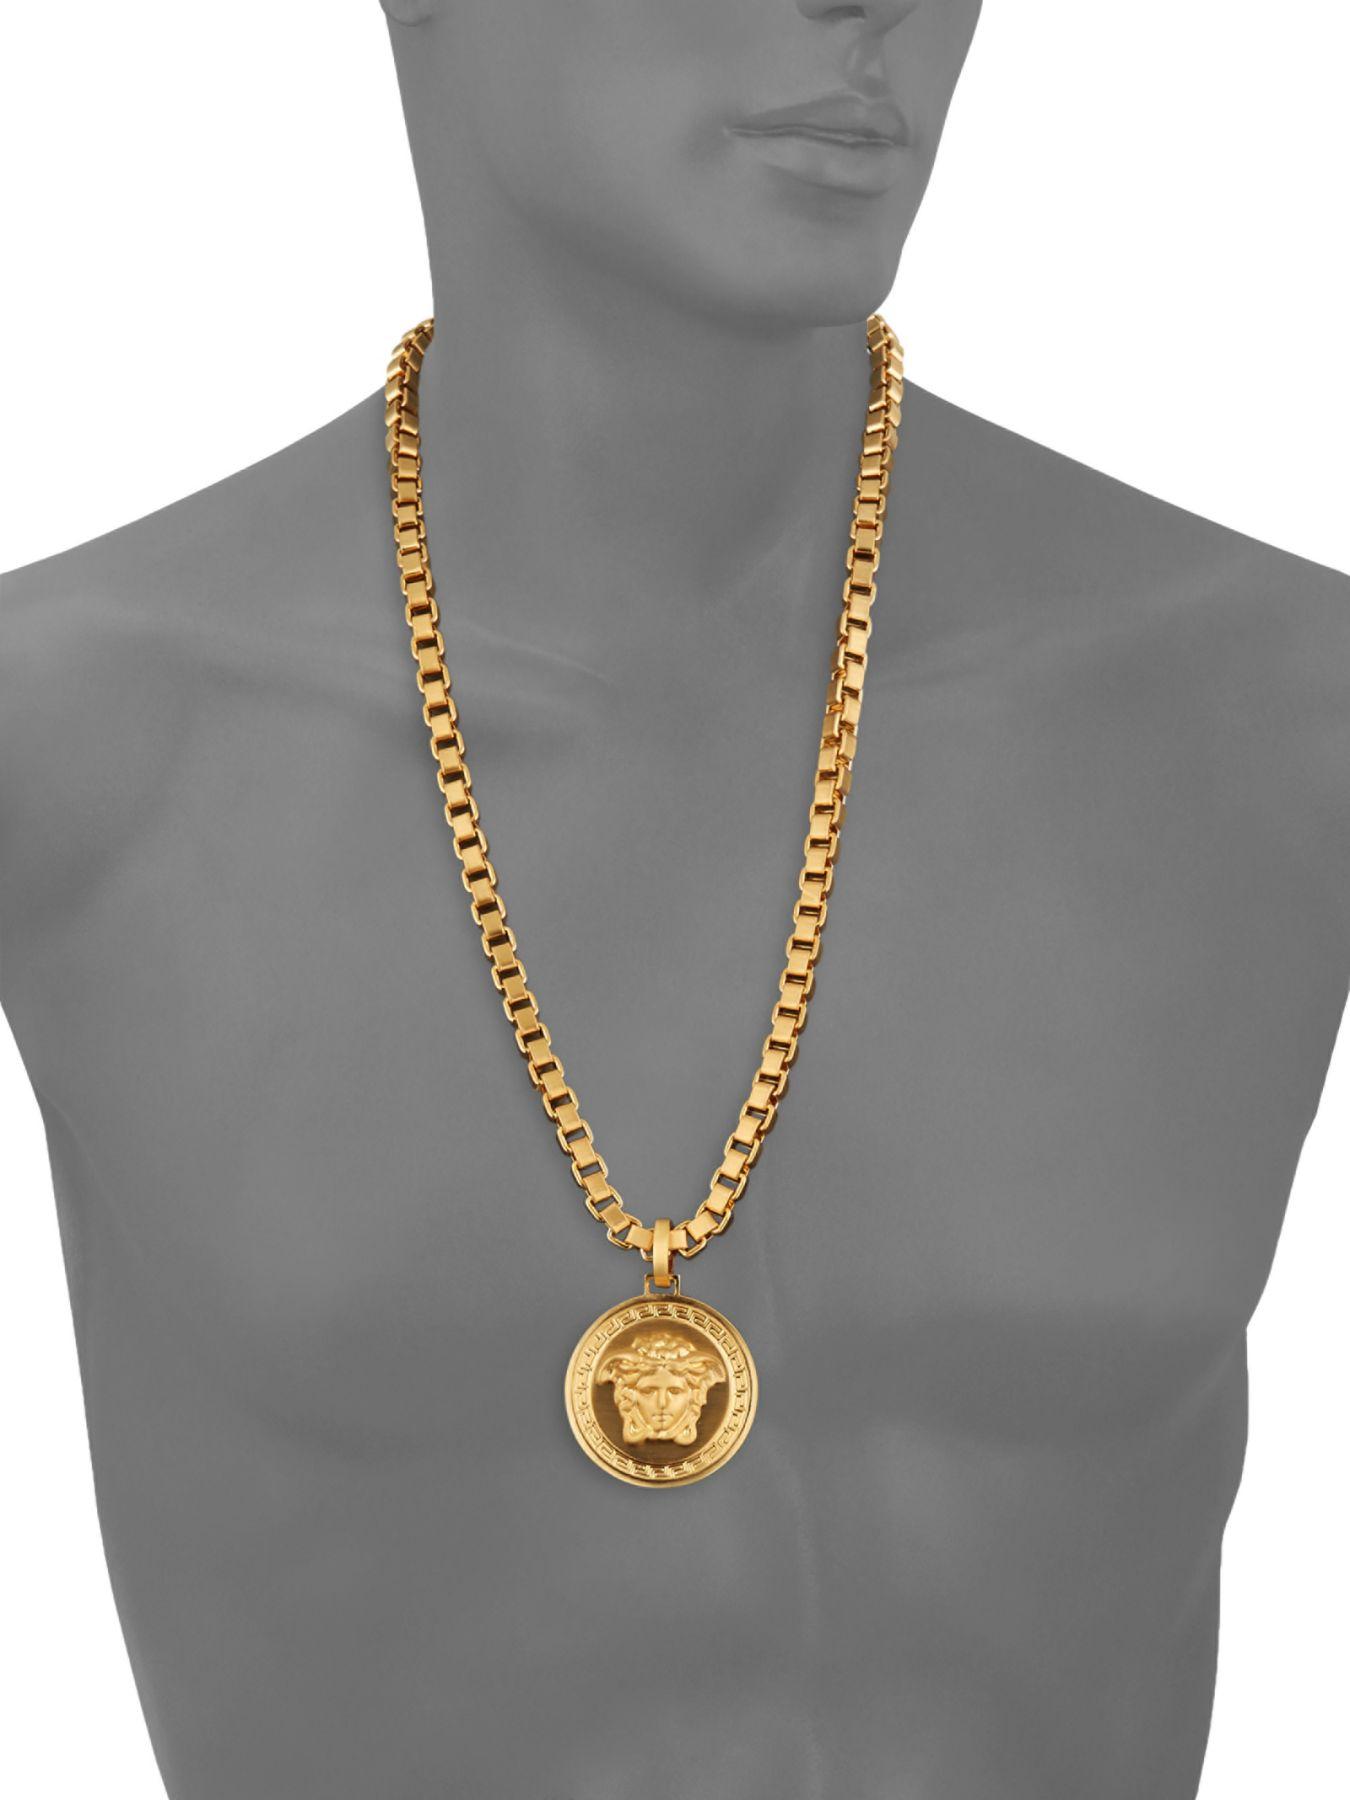 Versace Chain Pendant Necklace in Gold (Metallic) for Men - Lyst